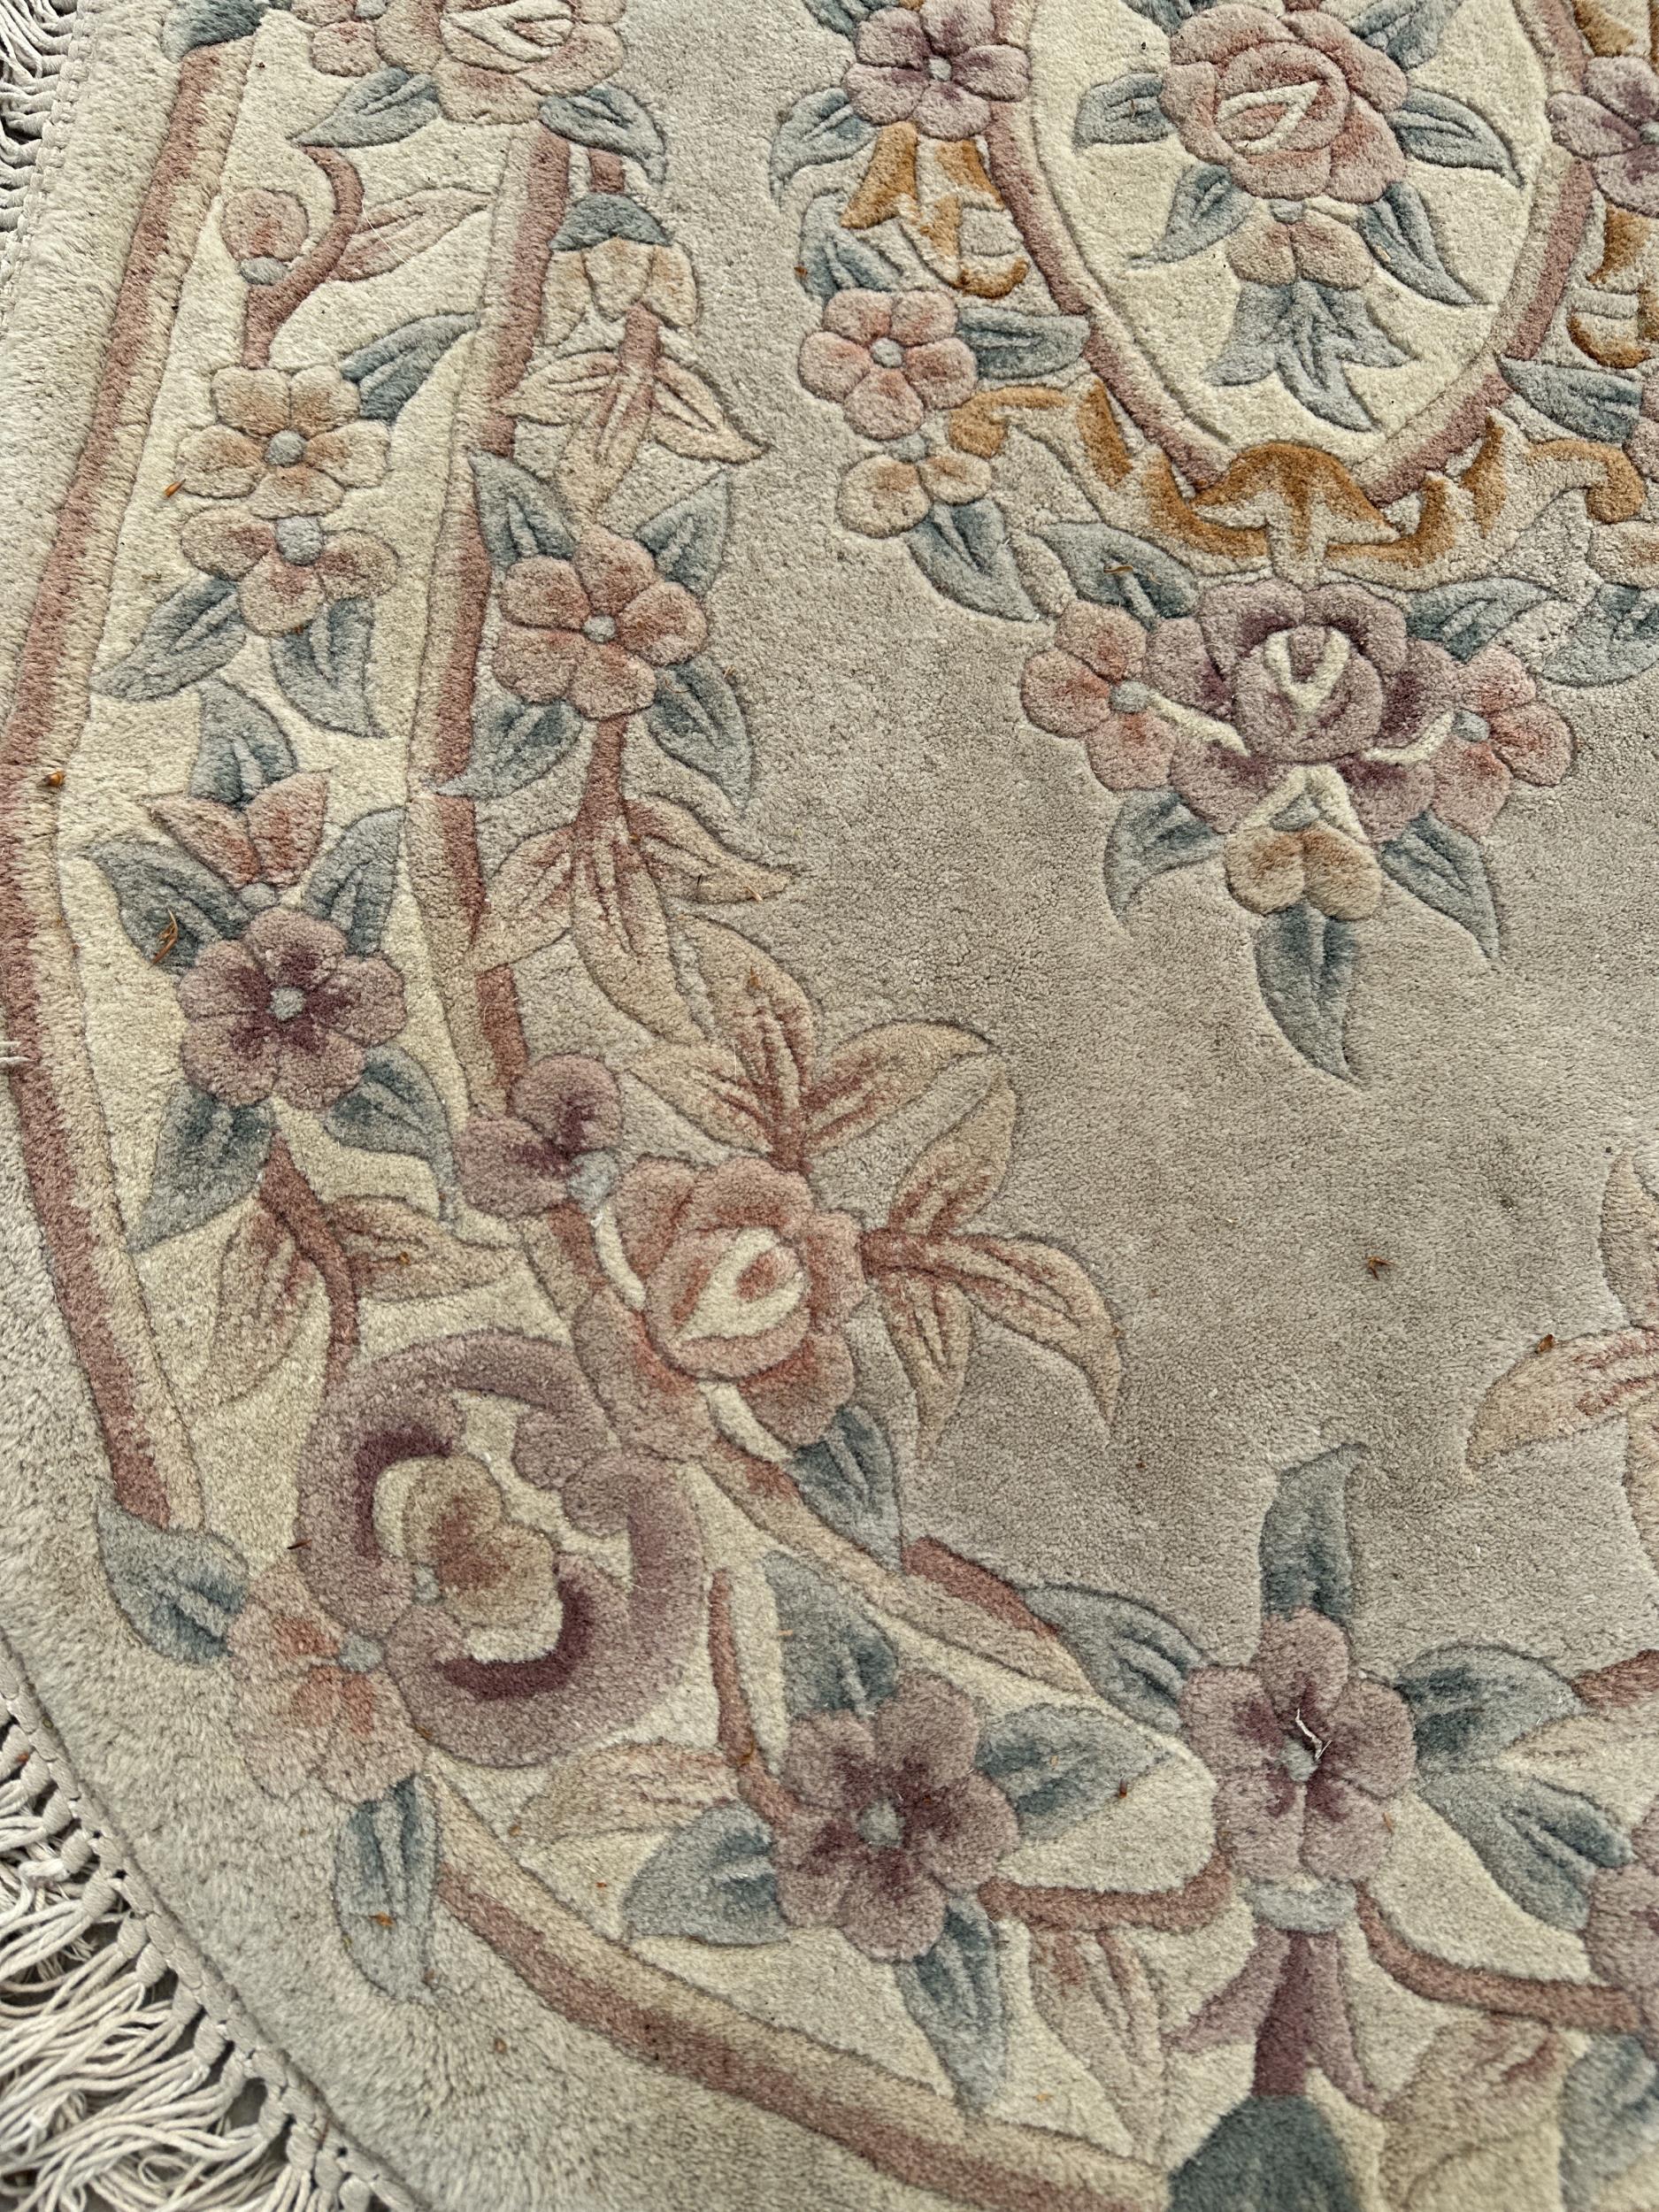 AN OVAL PEACH PATTERNED FRINGED RUG - Image 2 of 2